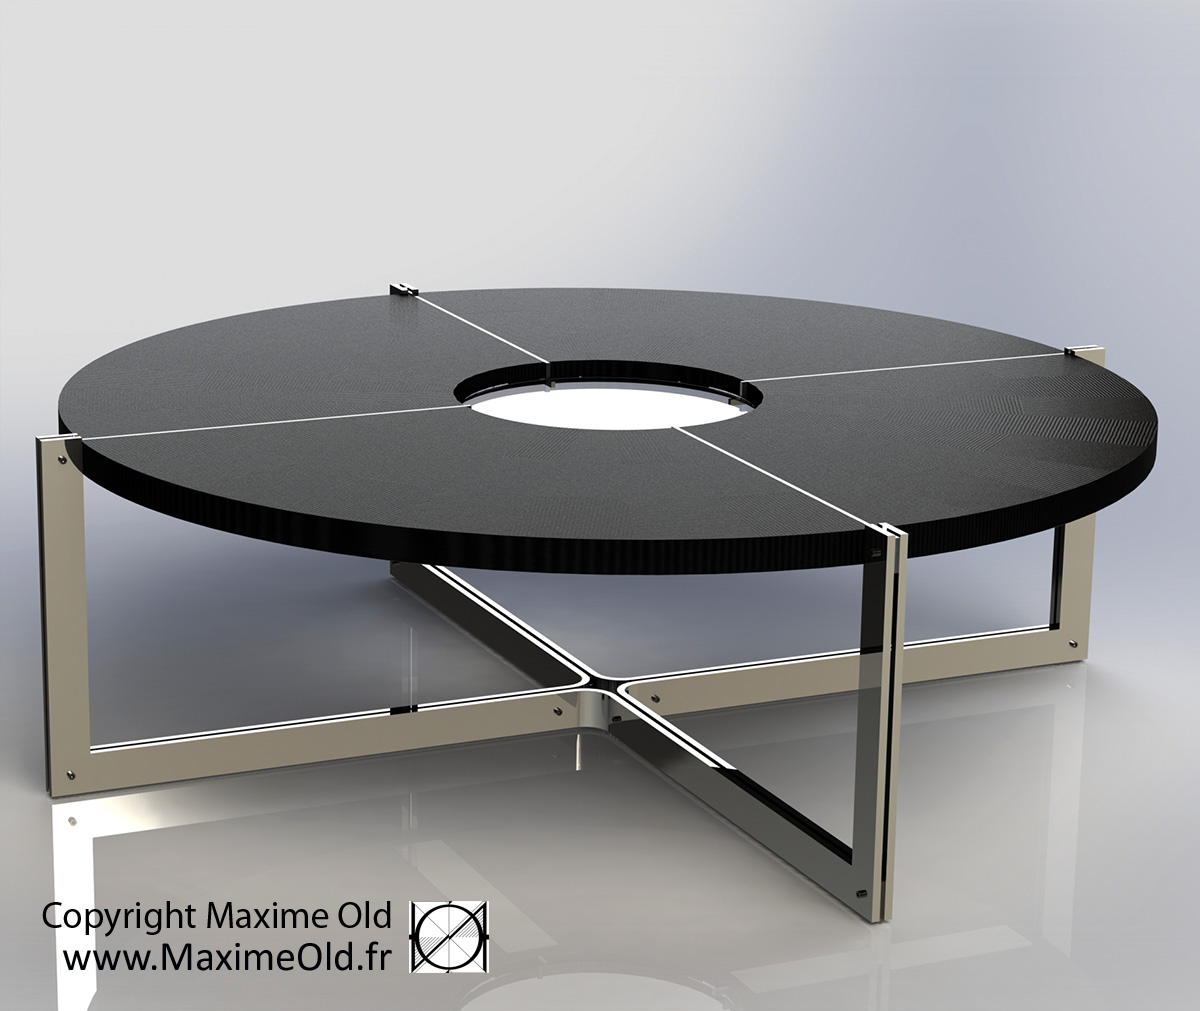 Tables Basses-d Appoint Maxime Old: Table Rose des Vents